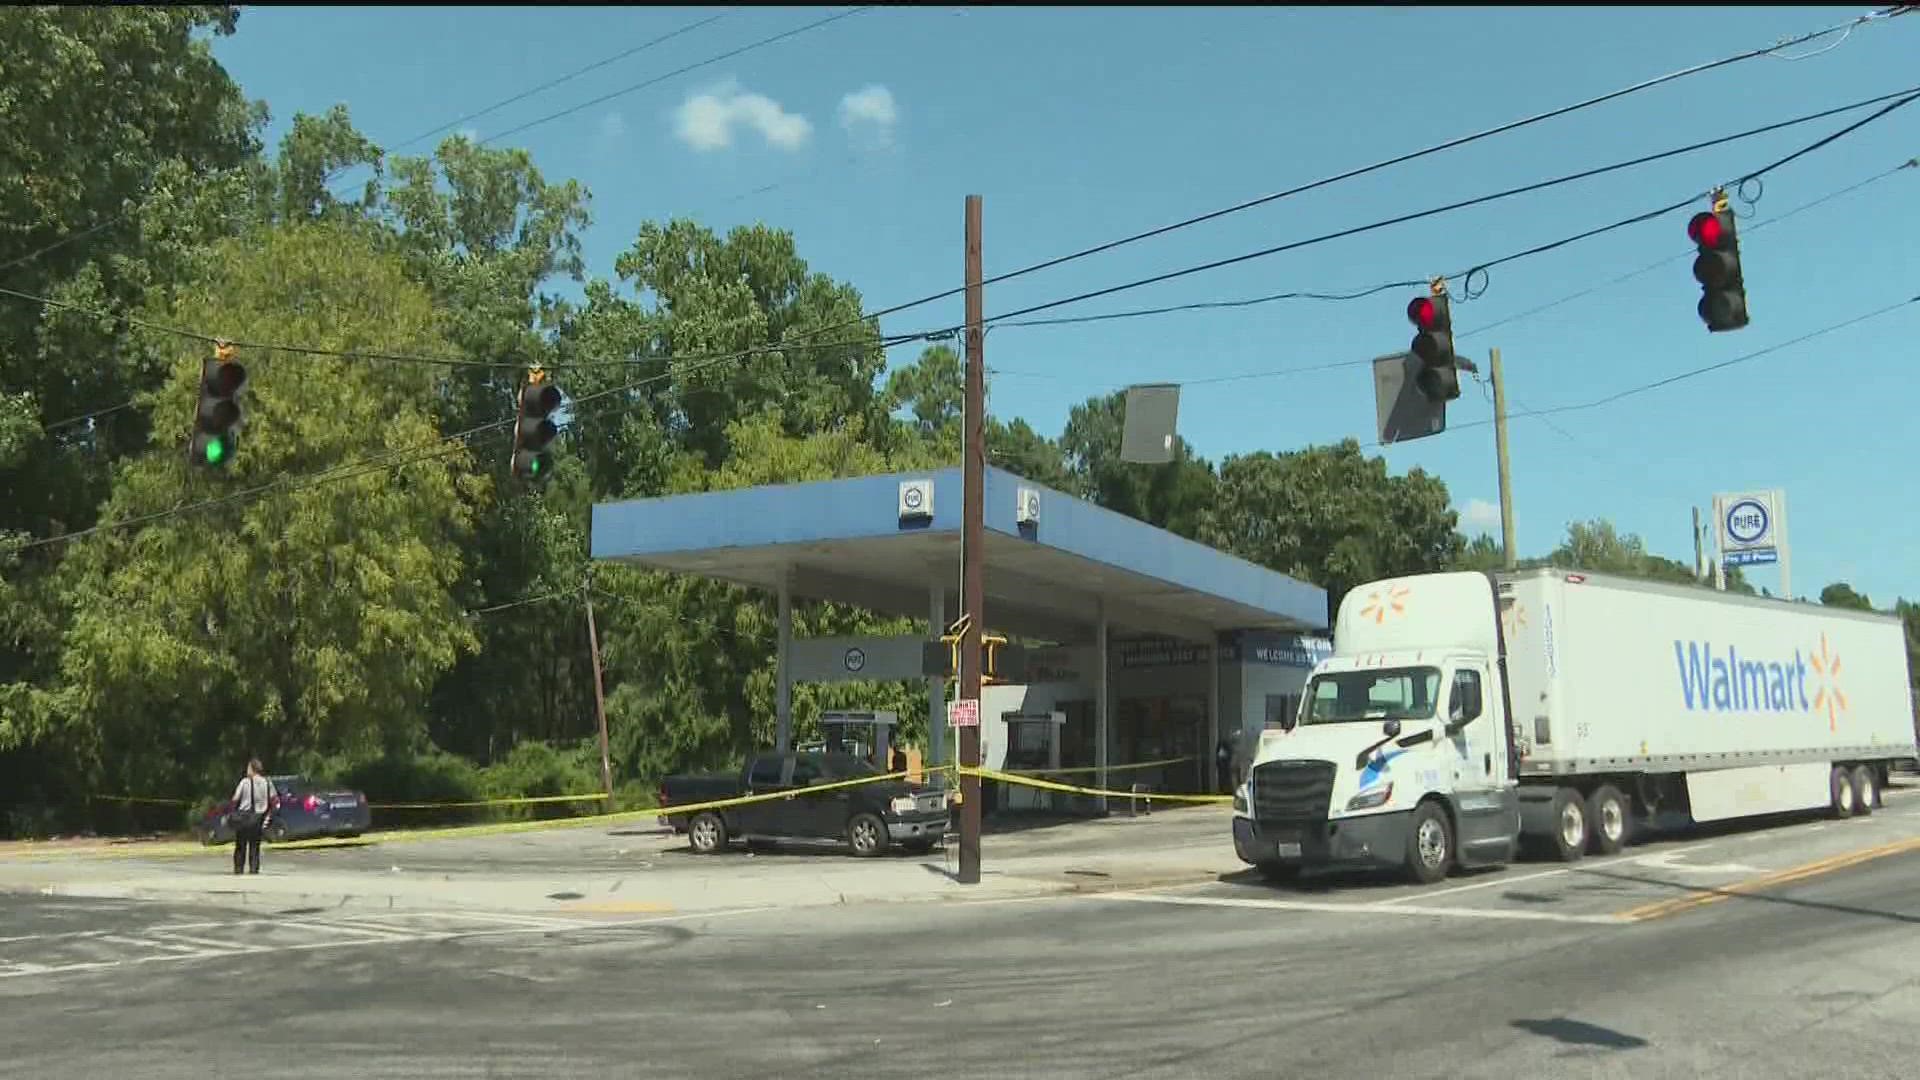 Atlanta Police officers are investigating a shooting near the "Pure" gas station located at 3015 Jonesboro Road.